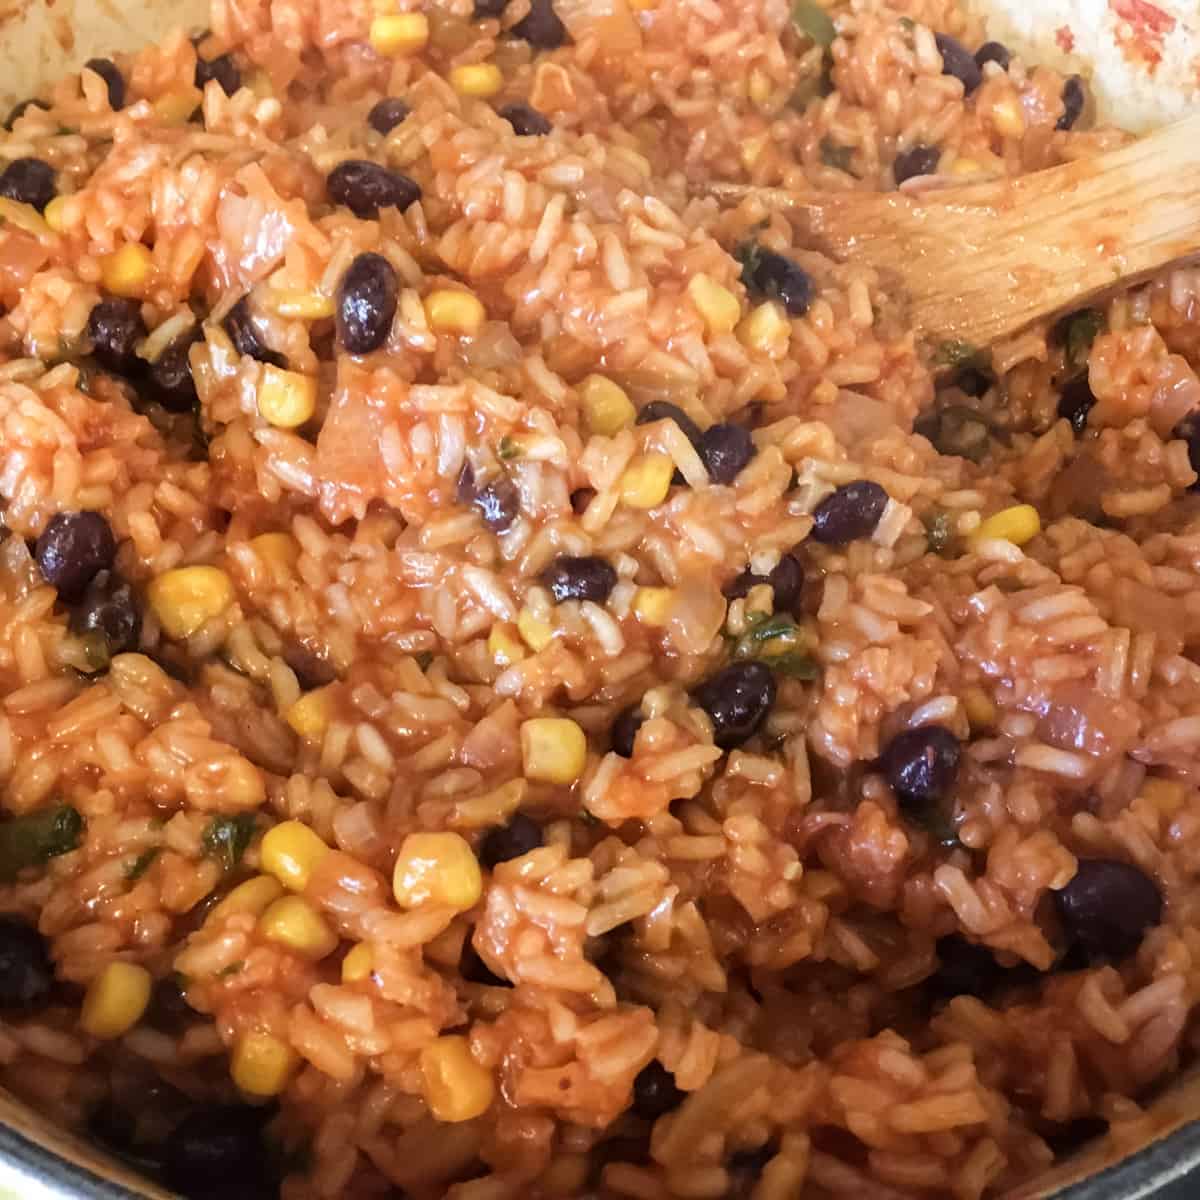 Cooked rice with black beans and corn in a pot.